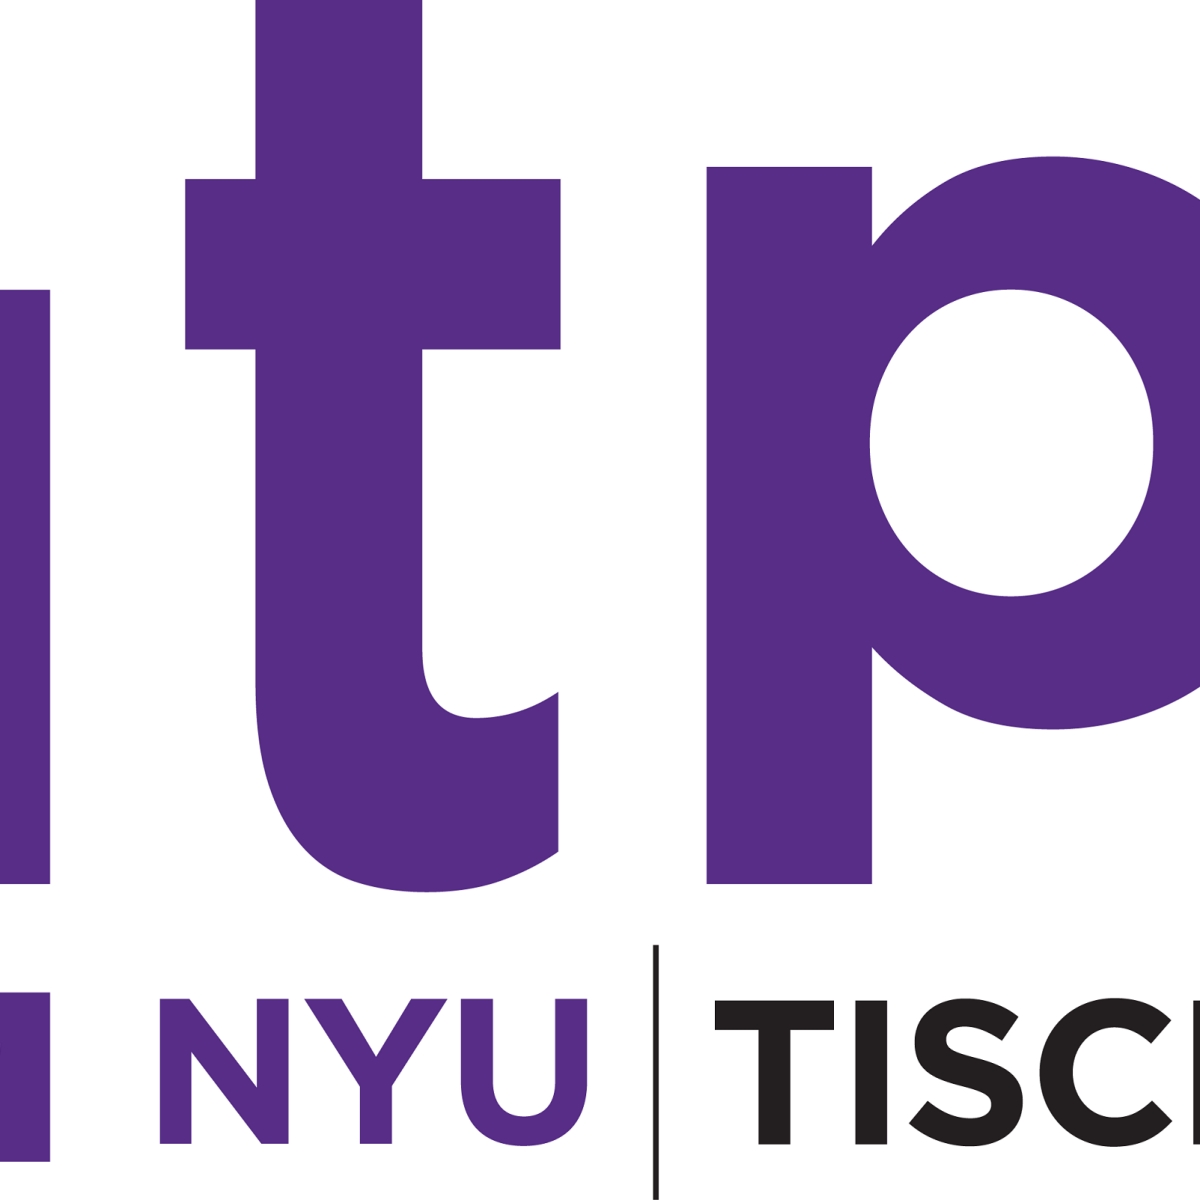 Image of ITP written in purple and black.